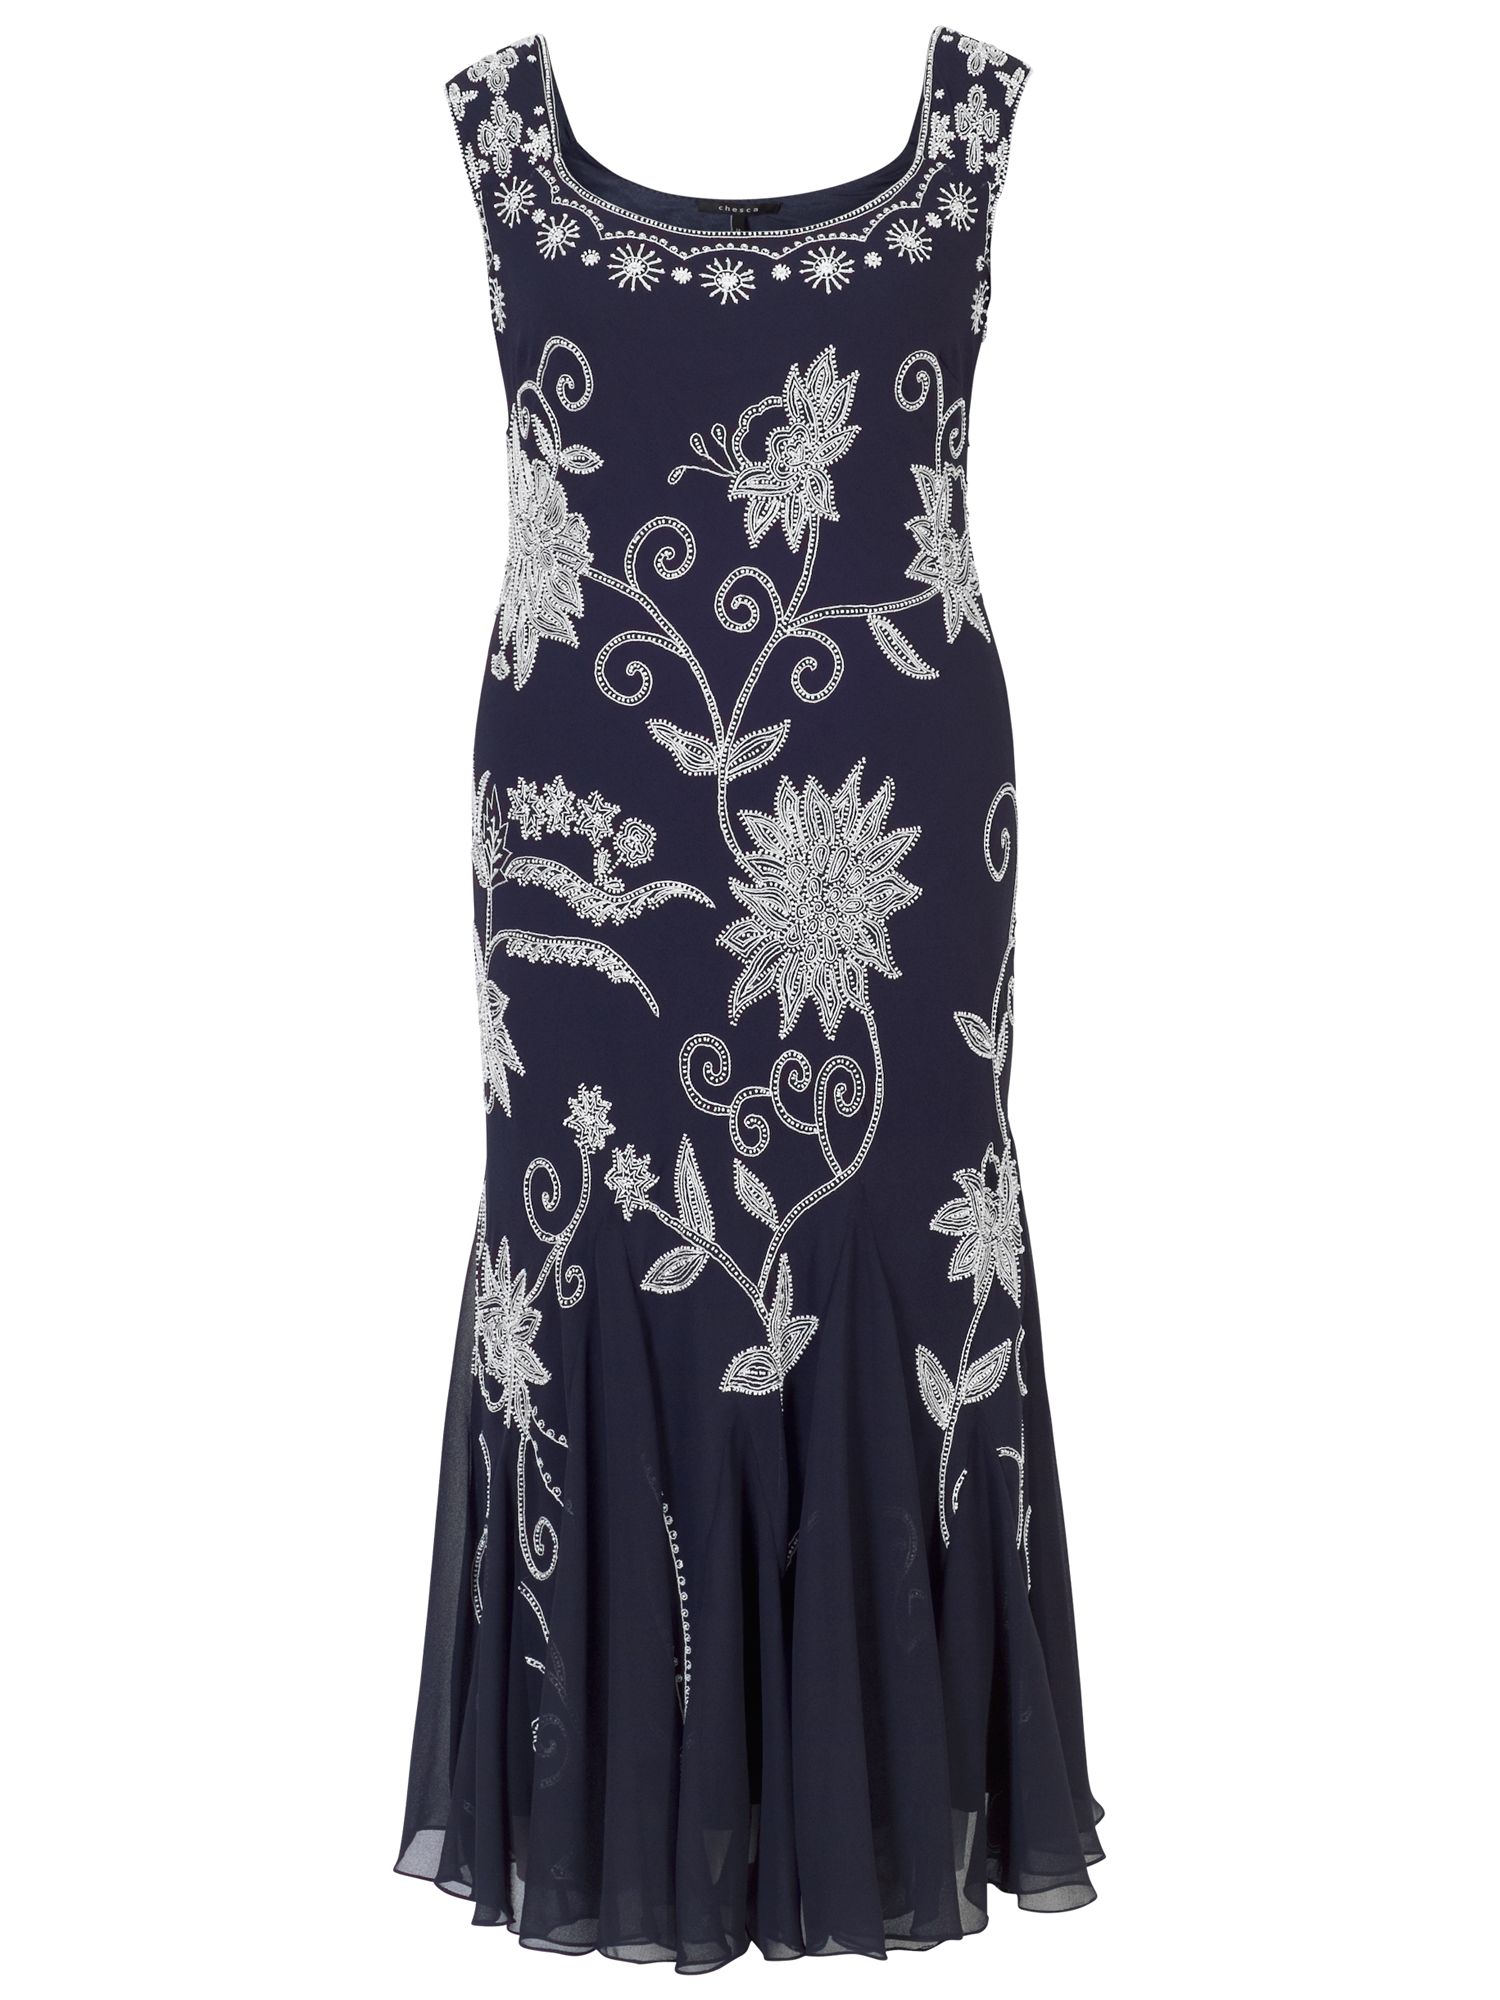 Chesca Embroidered Beaded Dress, Navy/Ivory at John Lewis & Partners